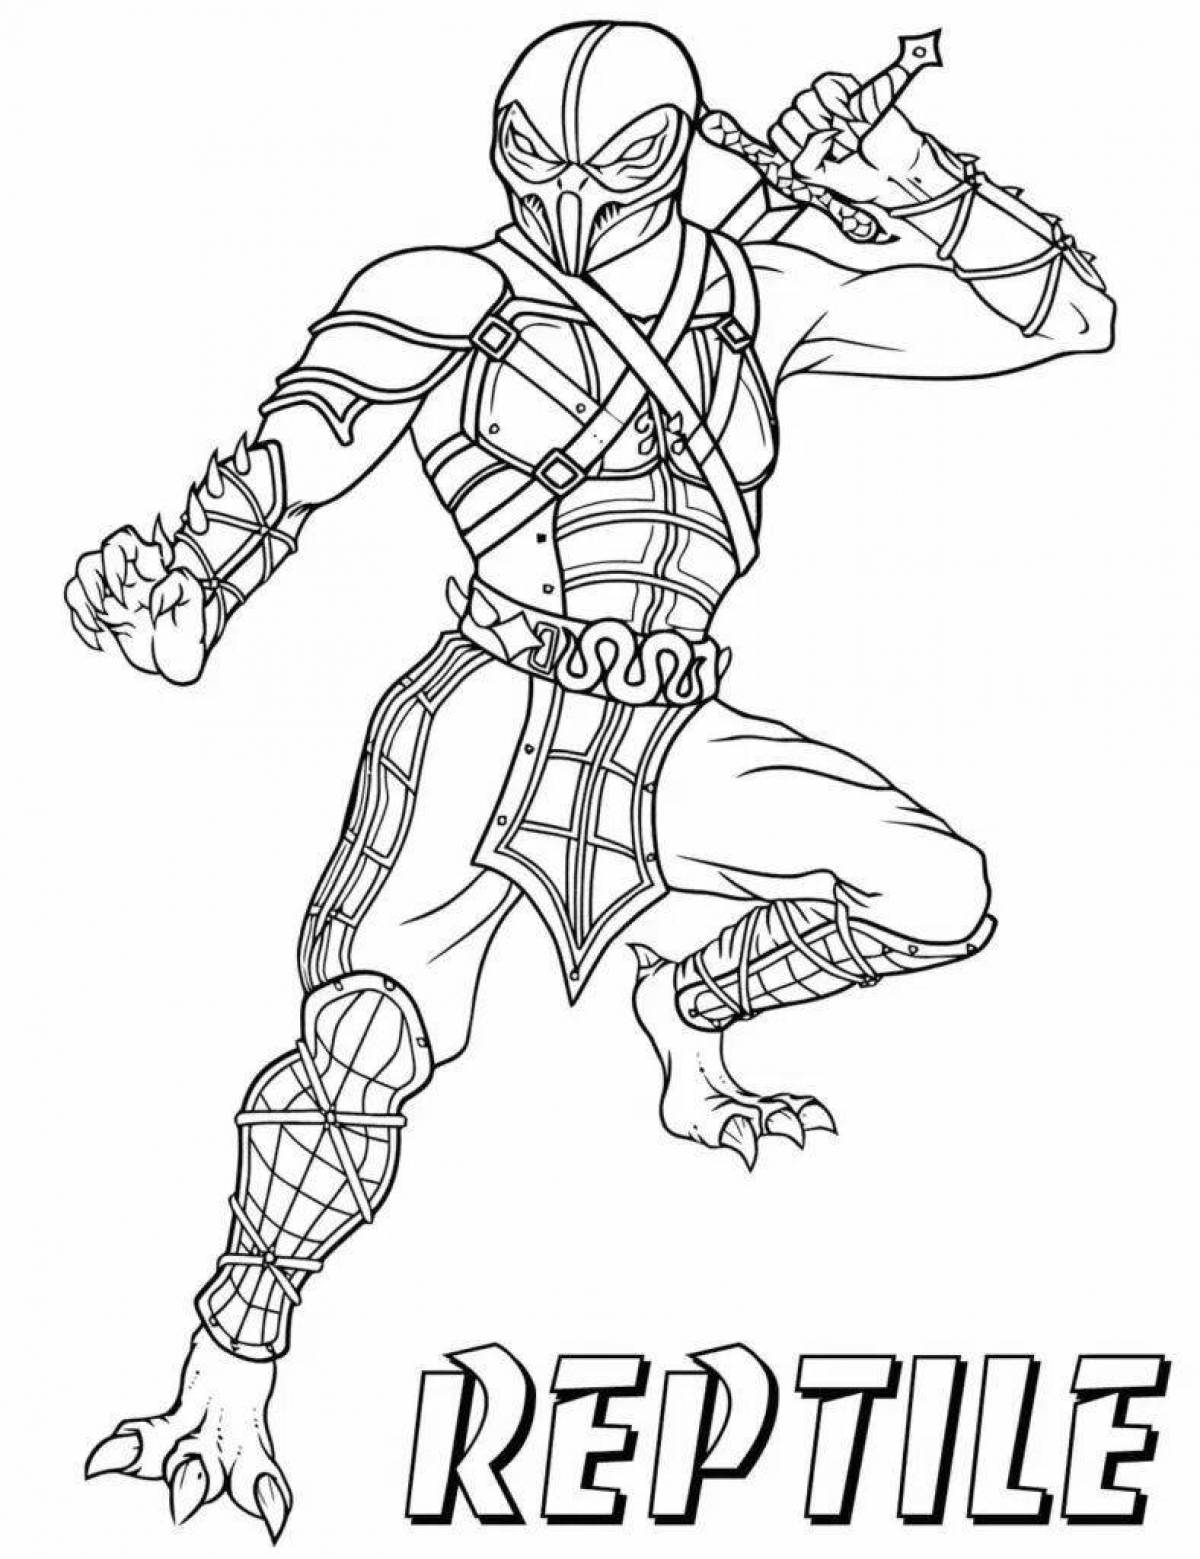 Playful akado fighters coloring page